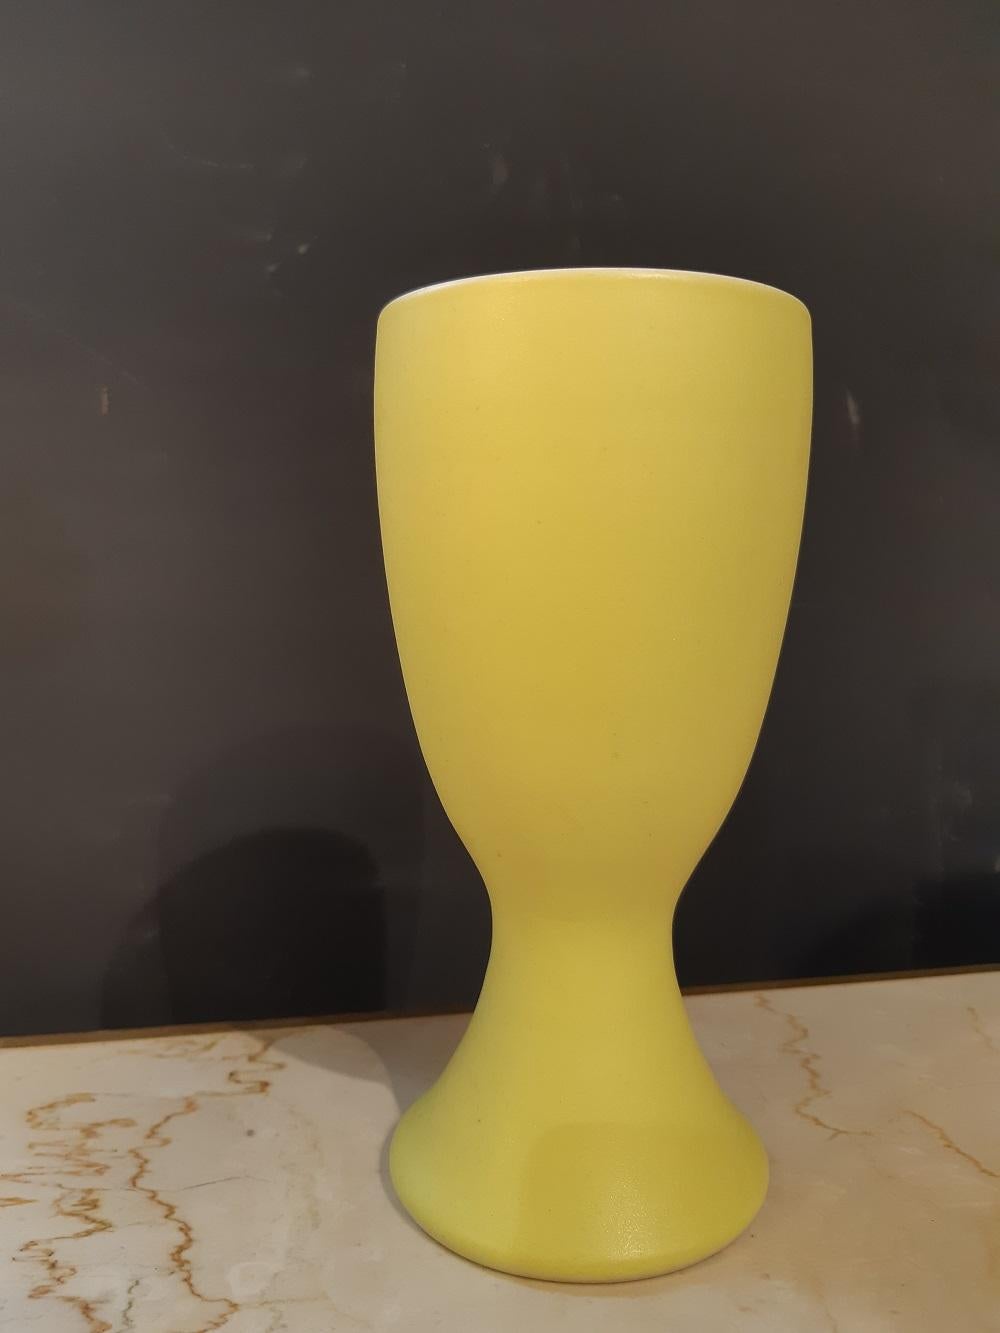 Pol Chambost French ceramic 1950 Mid-Century Modern

A yellow mazagran by Pol Chambost N°1064
White inside.
Signed on the reverse
Measures: Height 17cm, width 8cm.

Good condition.